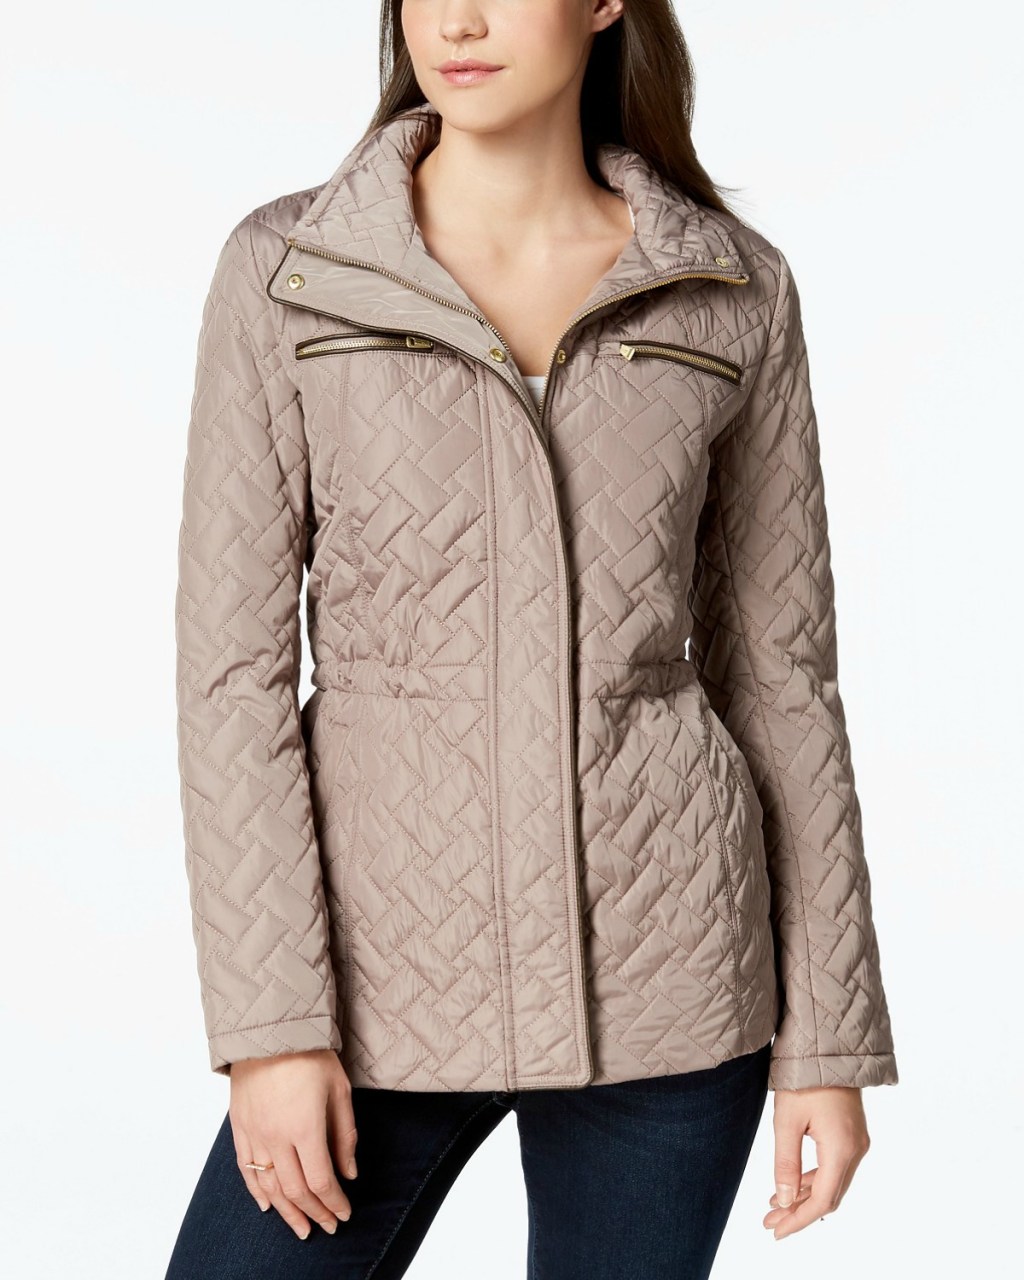 Cole Haan Women's Quilted Anorak Only $49.99 at Zulily (Regularly $220)